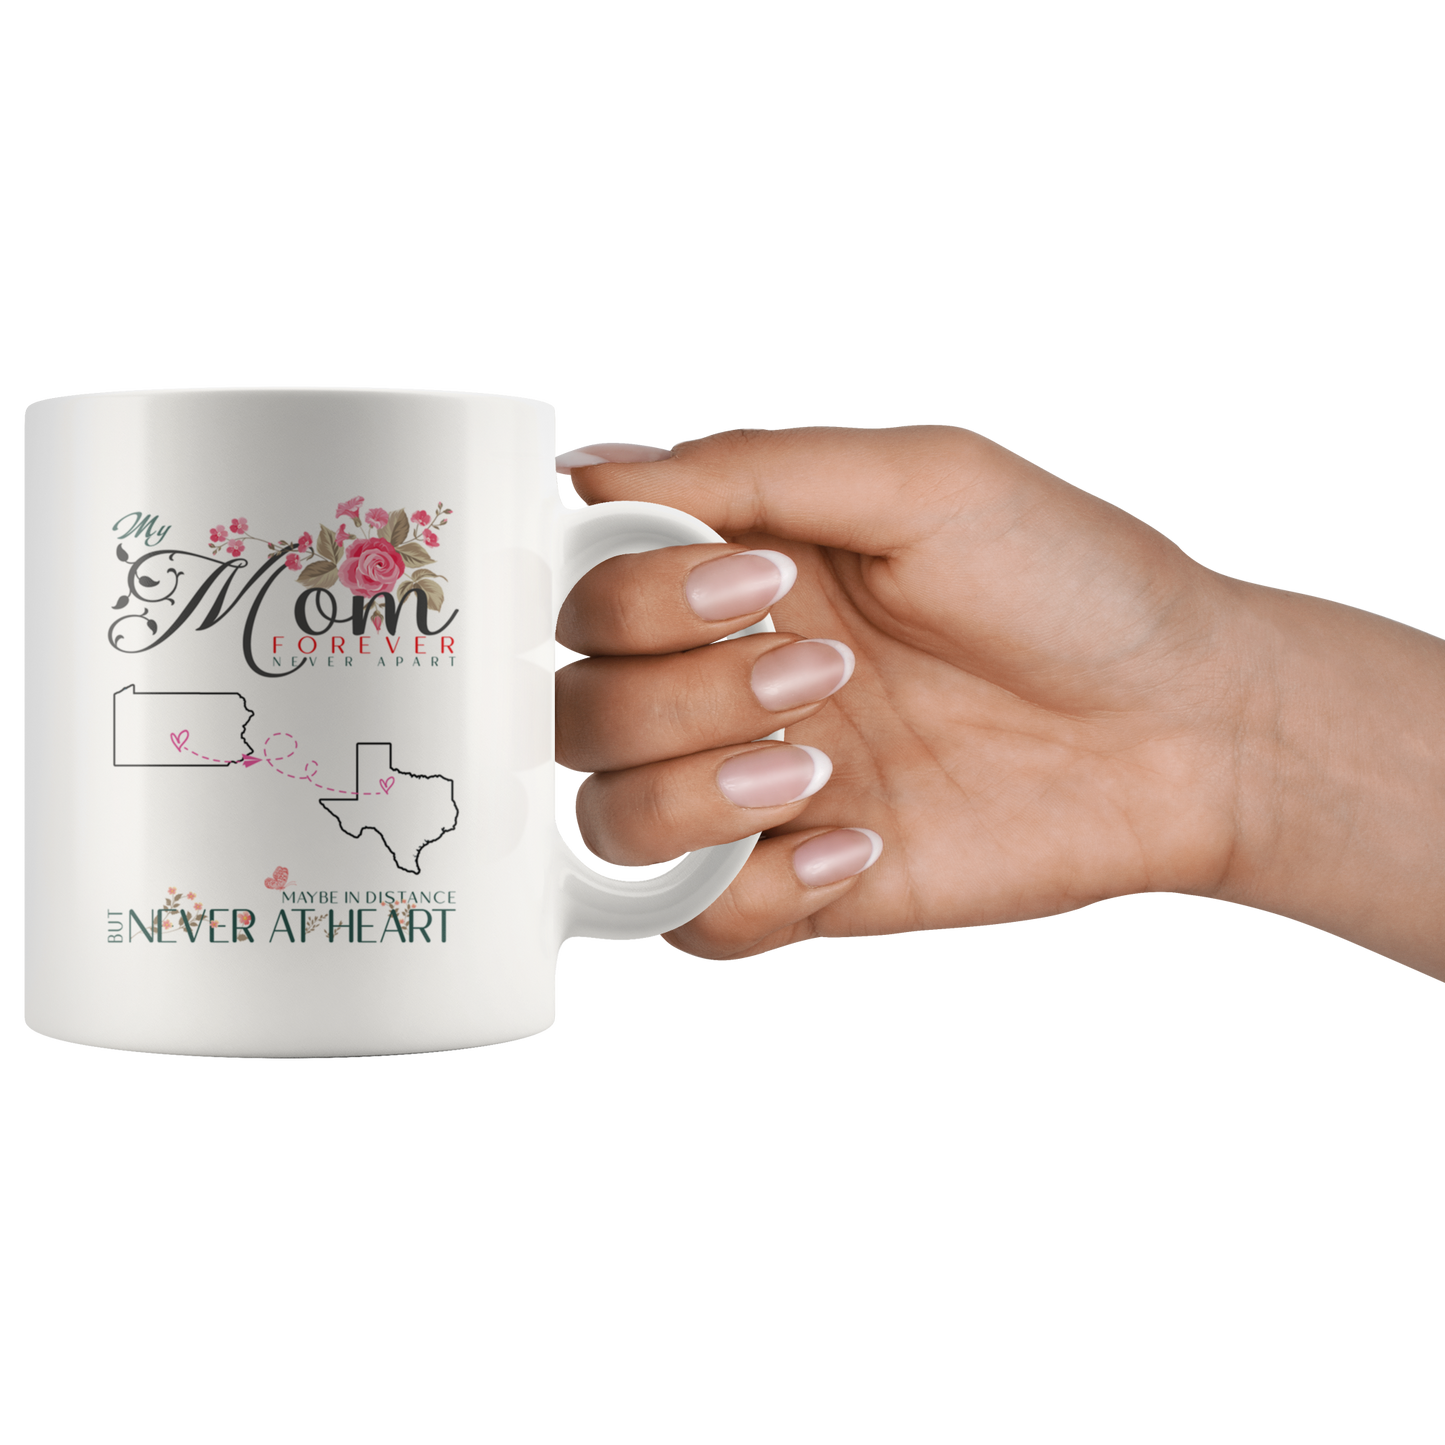 M-20321571-sp-23612 - [ Pennsylvania | Texas ]Personalized Mothers Day Coffee Mug - My Mom Forever Never A